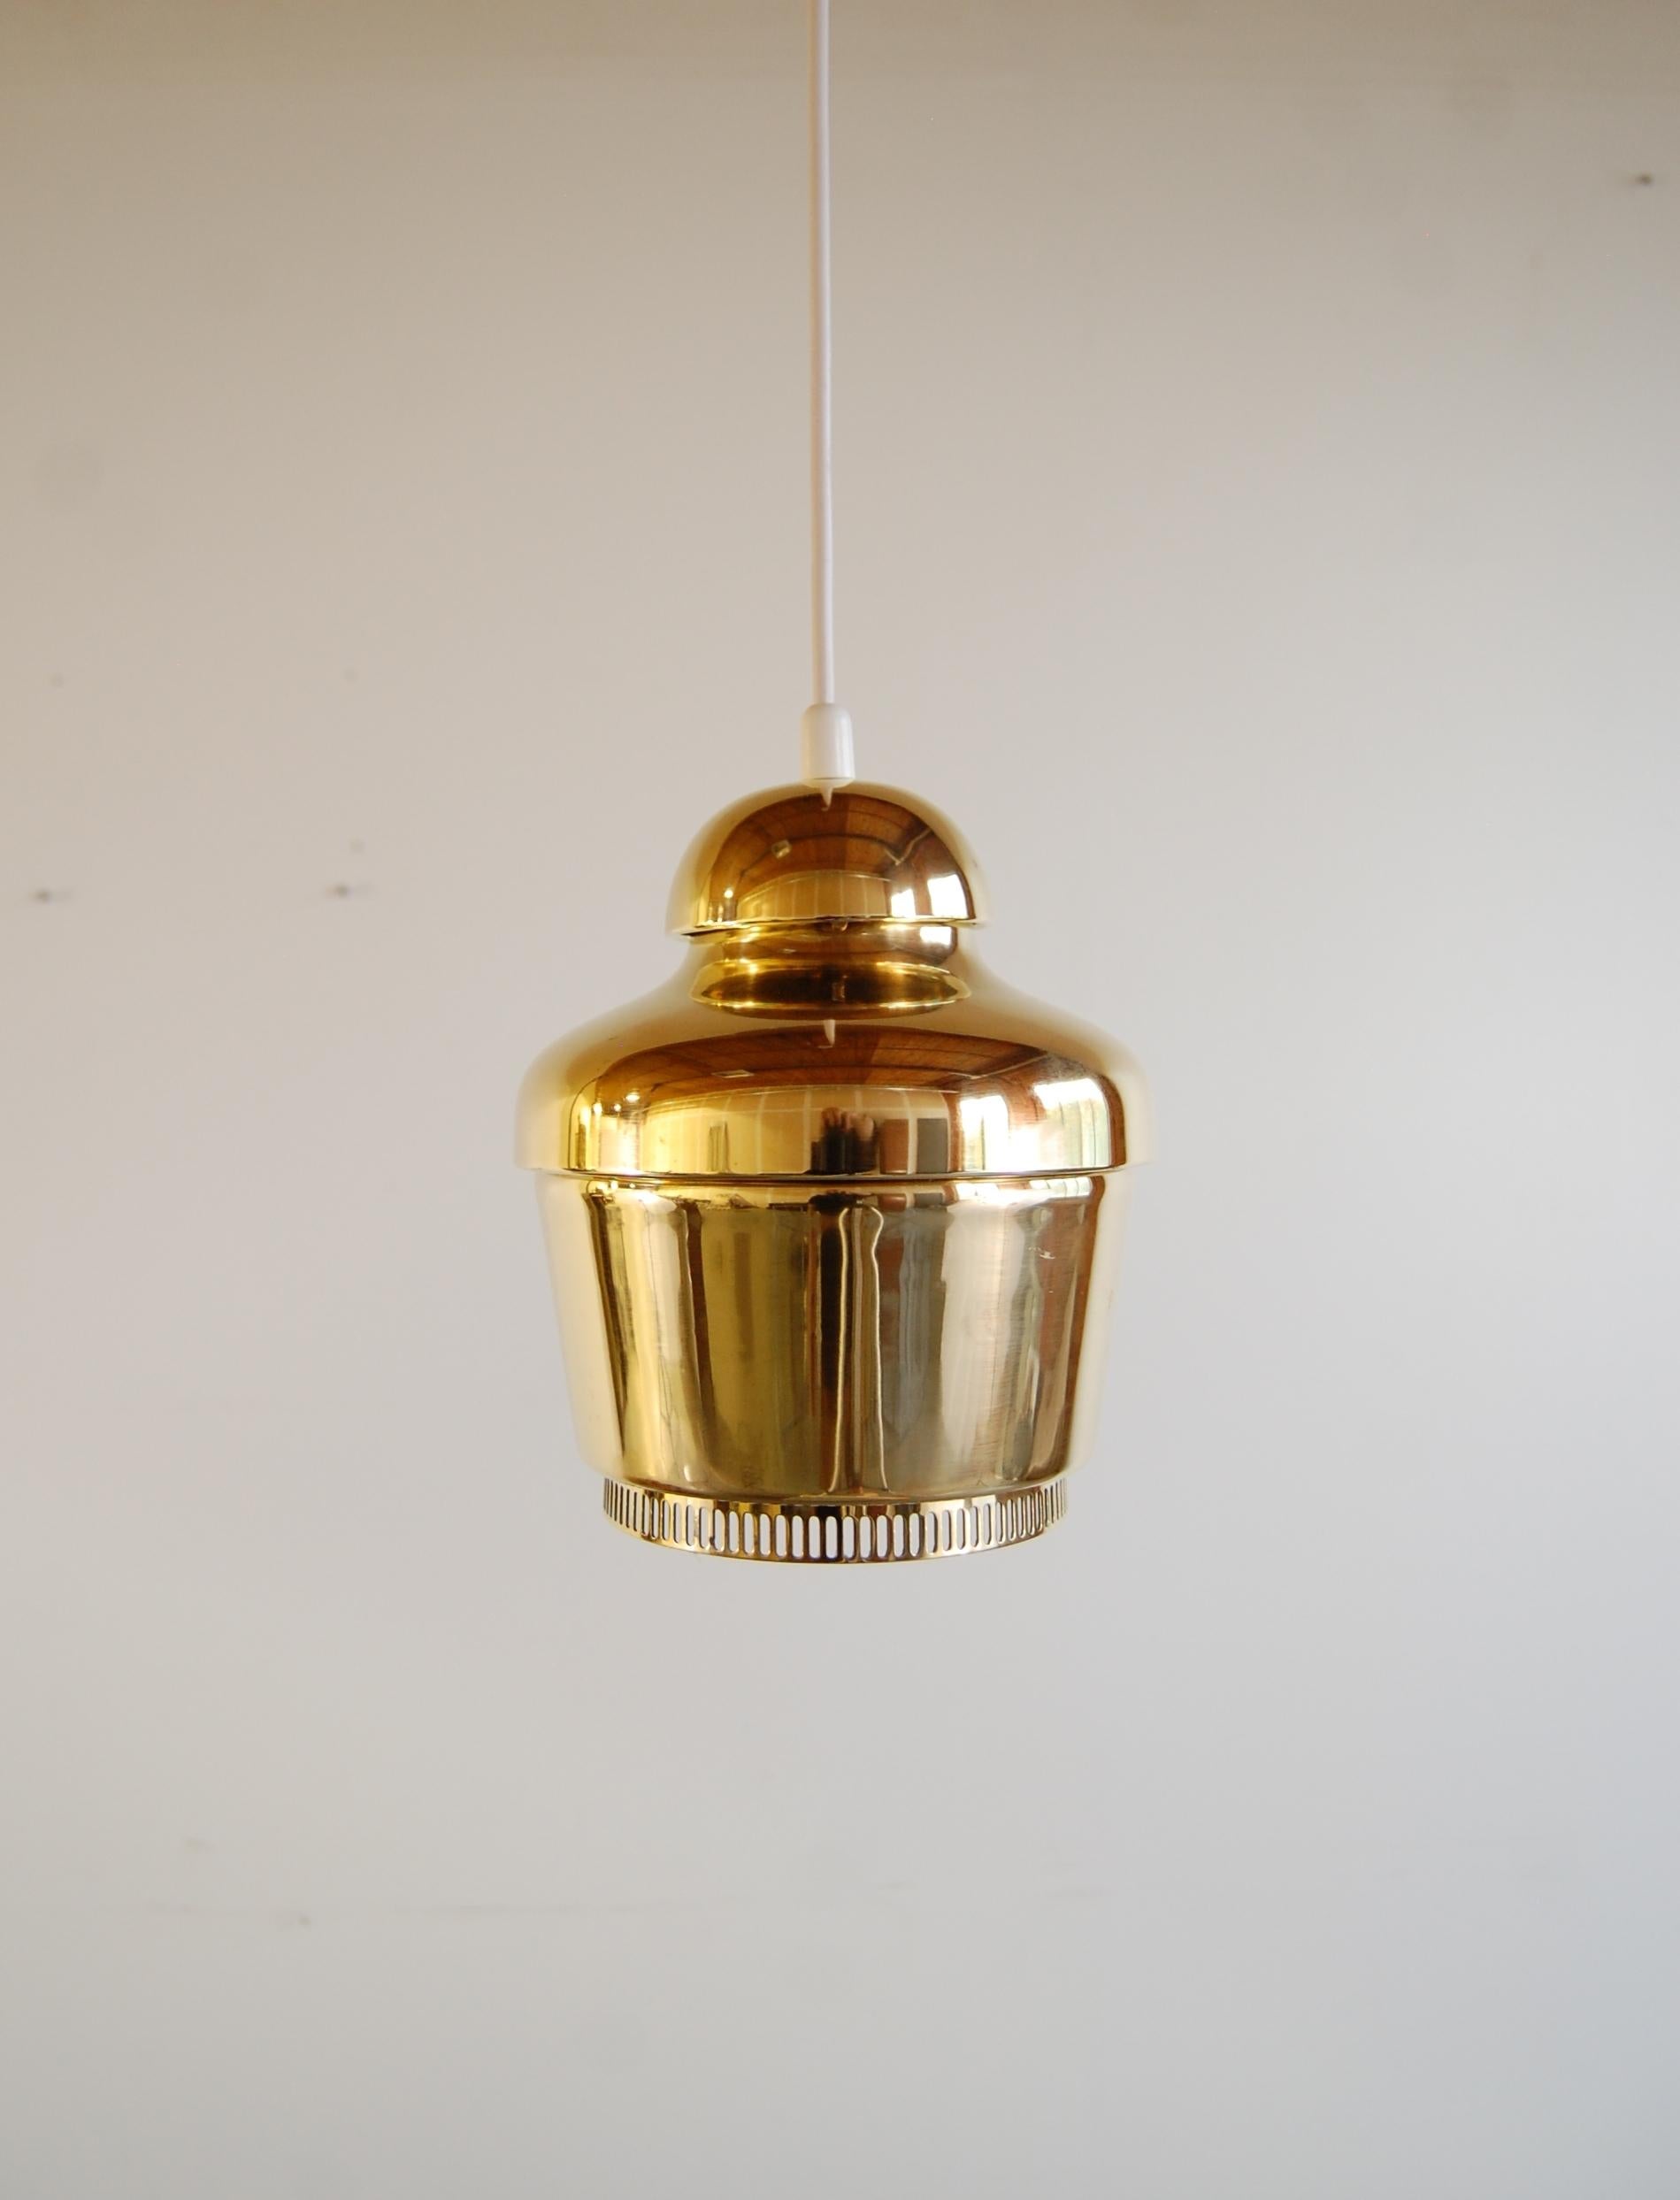 Early A330 pendant lamp, designed by Alvar Aalto, circa 1954, and produced by Valaistustyö Ky
Finland. Comes with optional wall mount swing arm. Solid brass. Newly polished and re-wired. Signed with impressed manufacturer's mark to interior